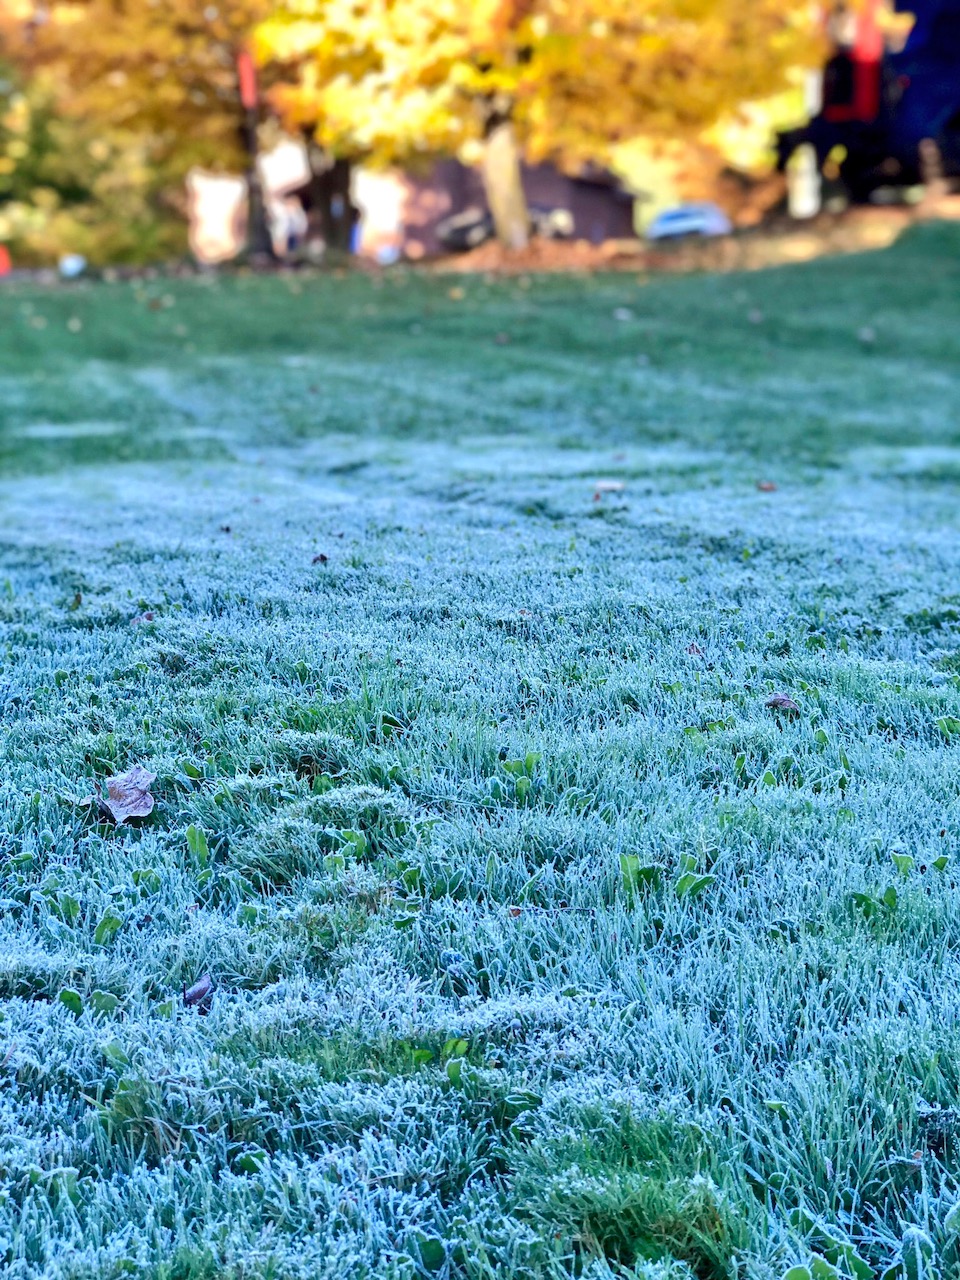 First touch of frost of the year on low lying areas and roof tops. September 29th, 2017.